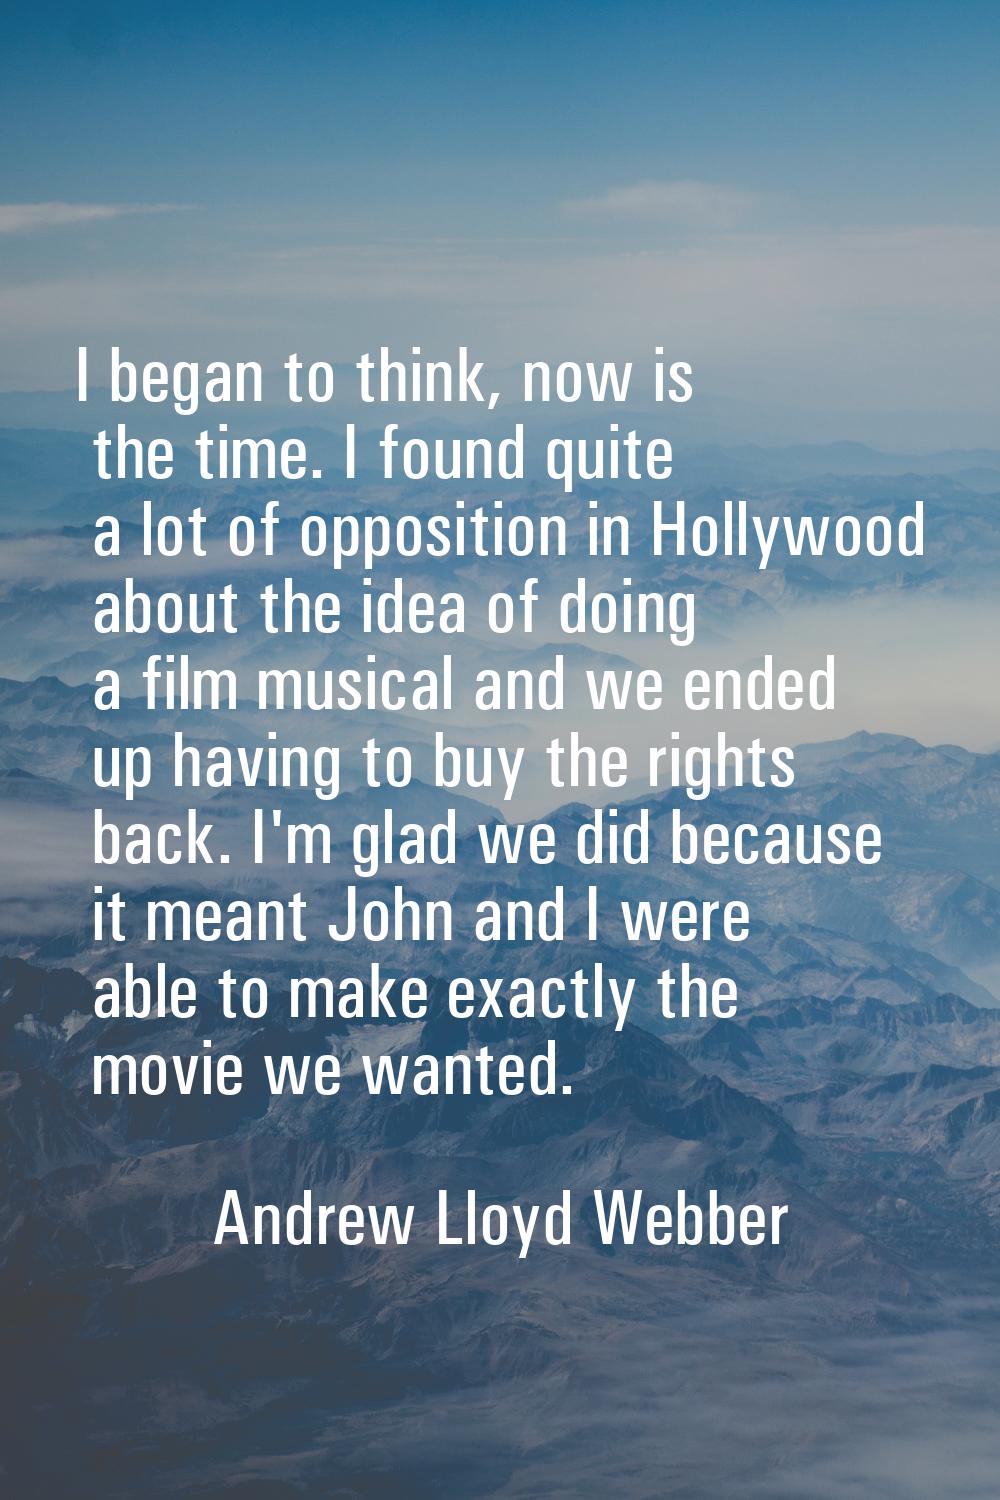 I began to think, now is the time. I found quite a lot of opposition in Hollywood about the idea of